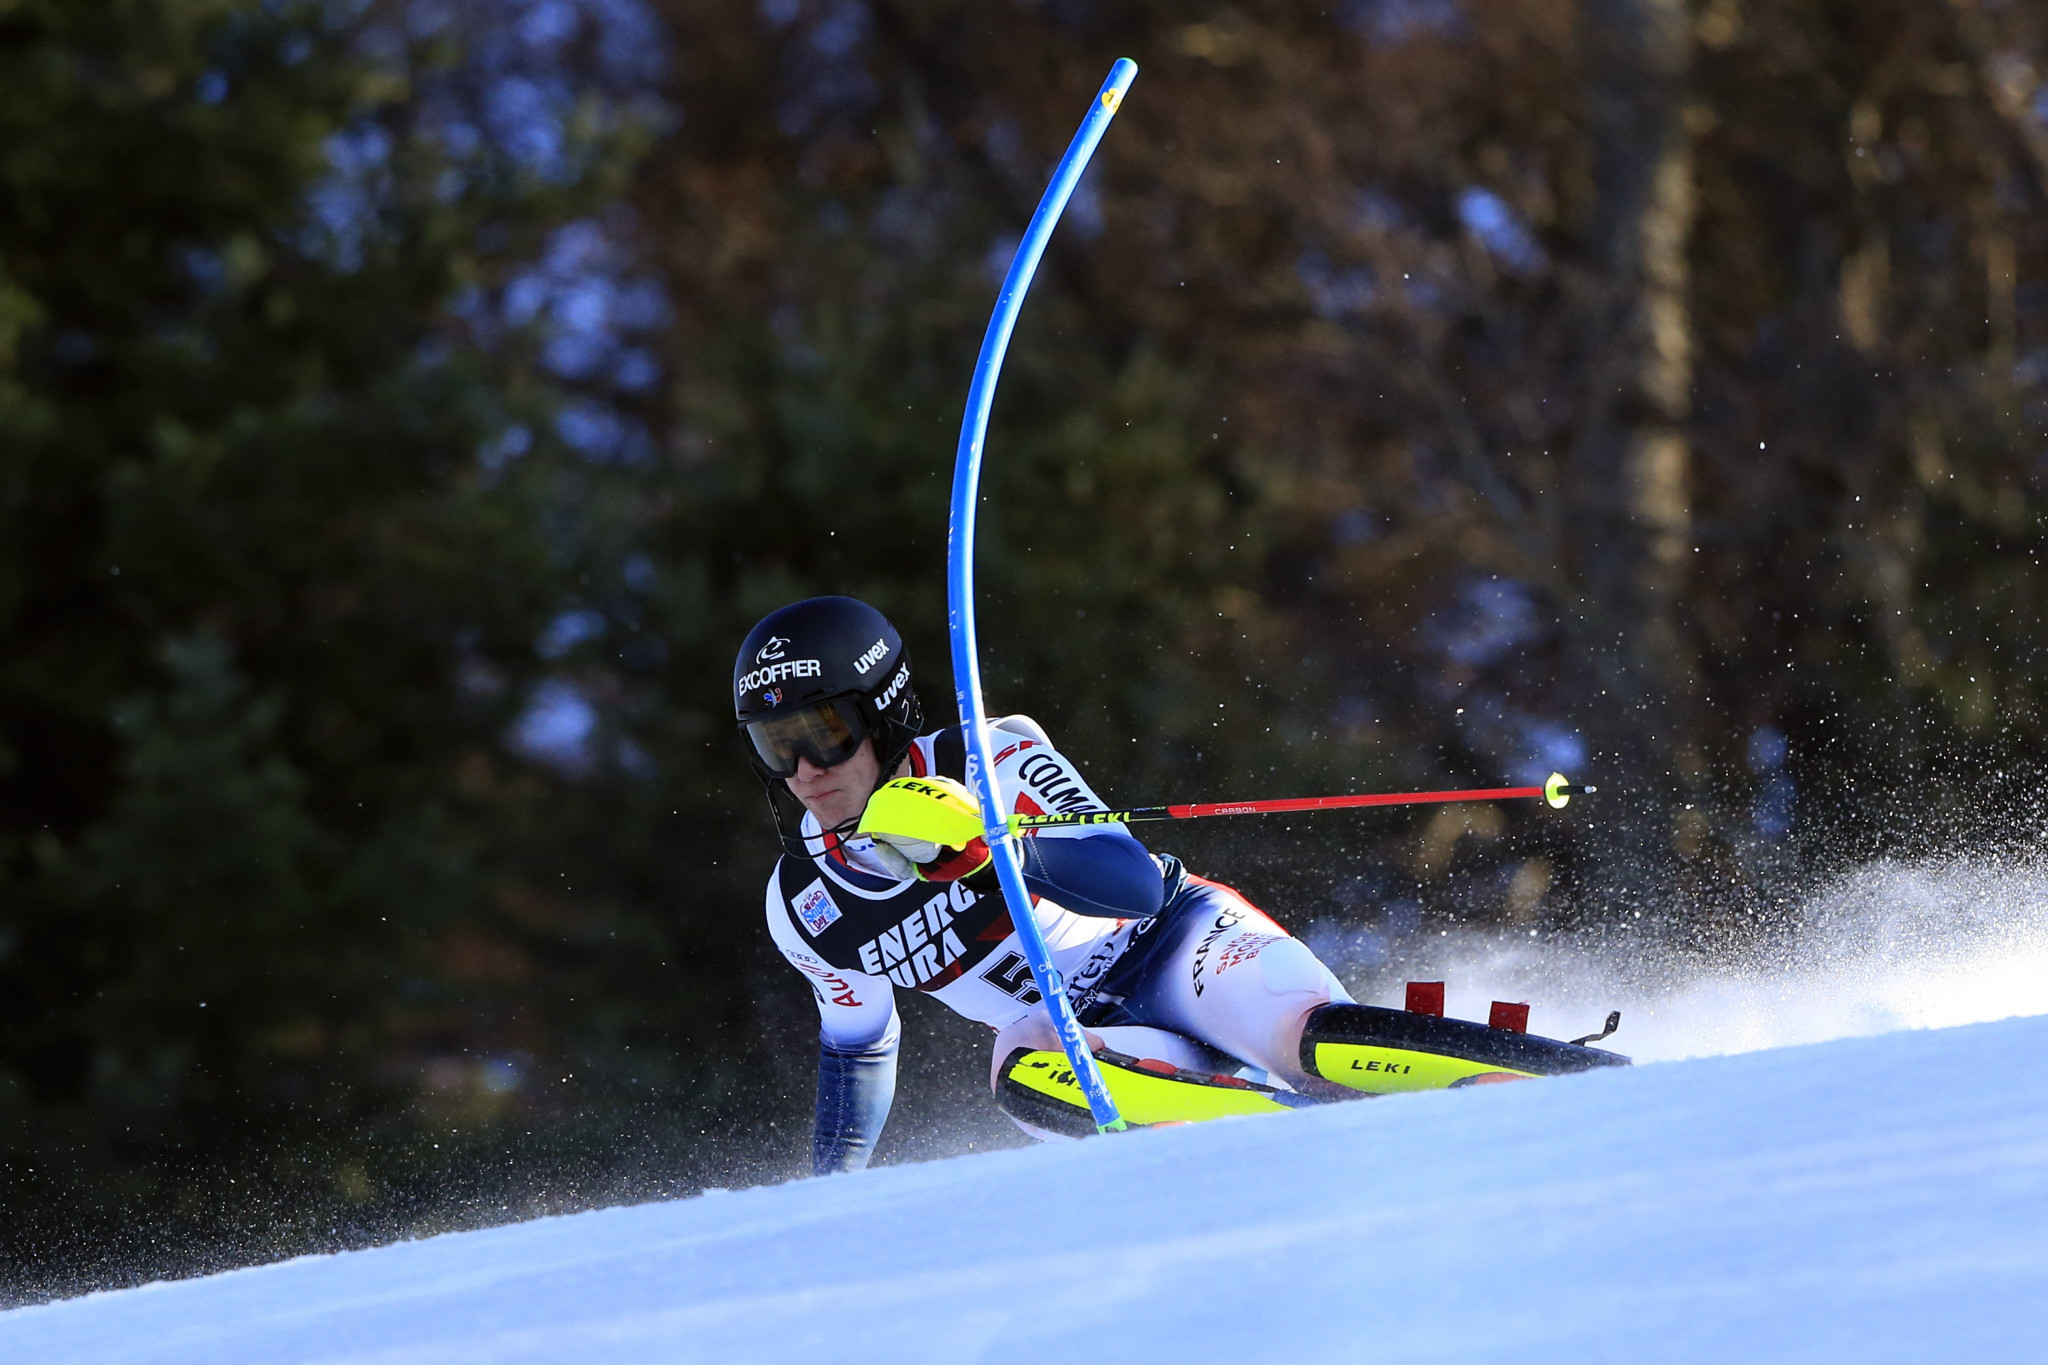 Noel goes top of FIS Alpine Ski World Cup slalom standings after storming win in Zagreb